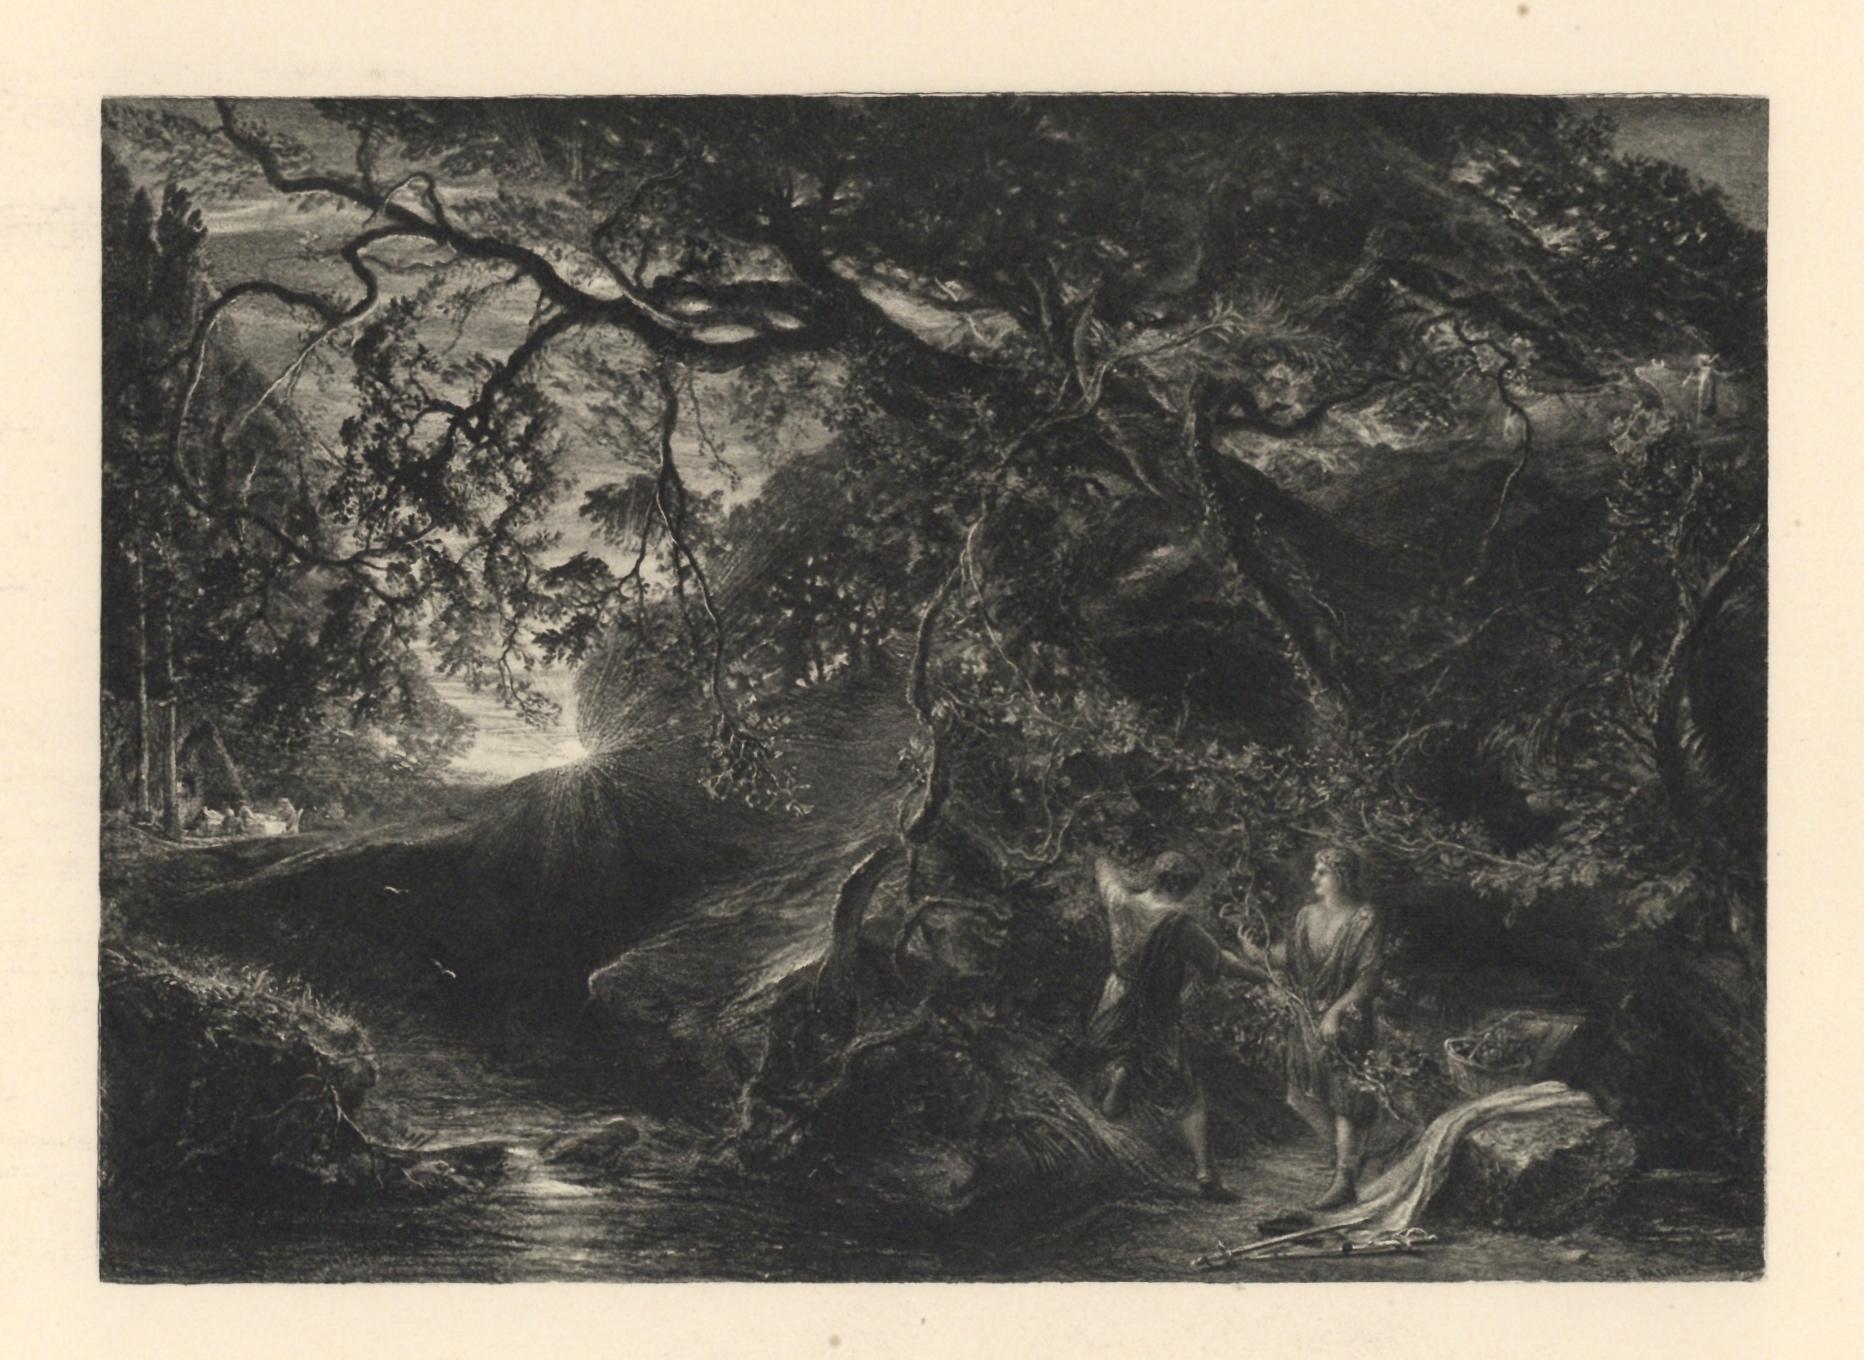 (after) Samuel Palmer - "The Brothers under the Vine" - Print by Samuel Palmer (b.1805)